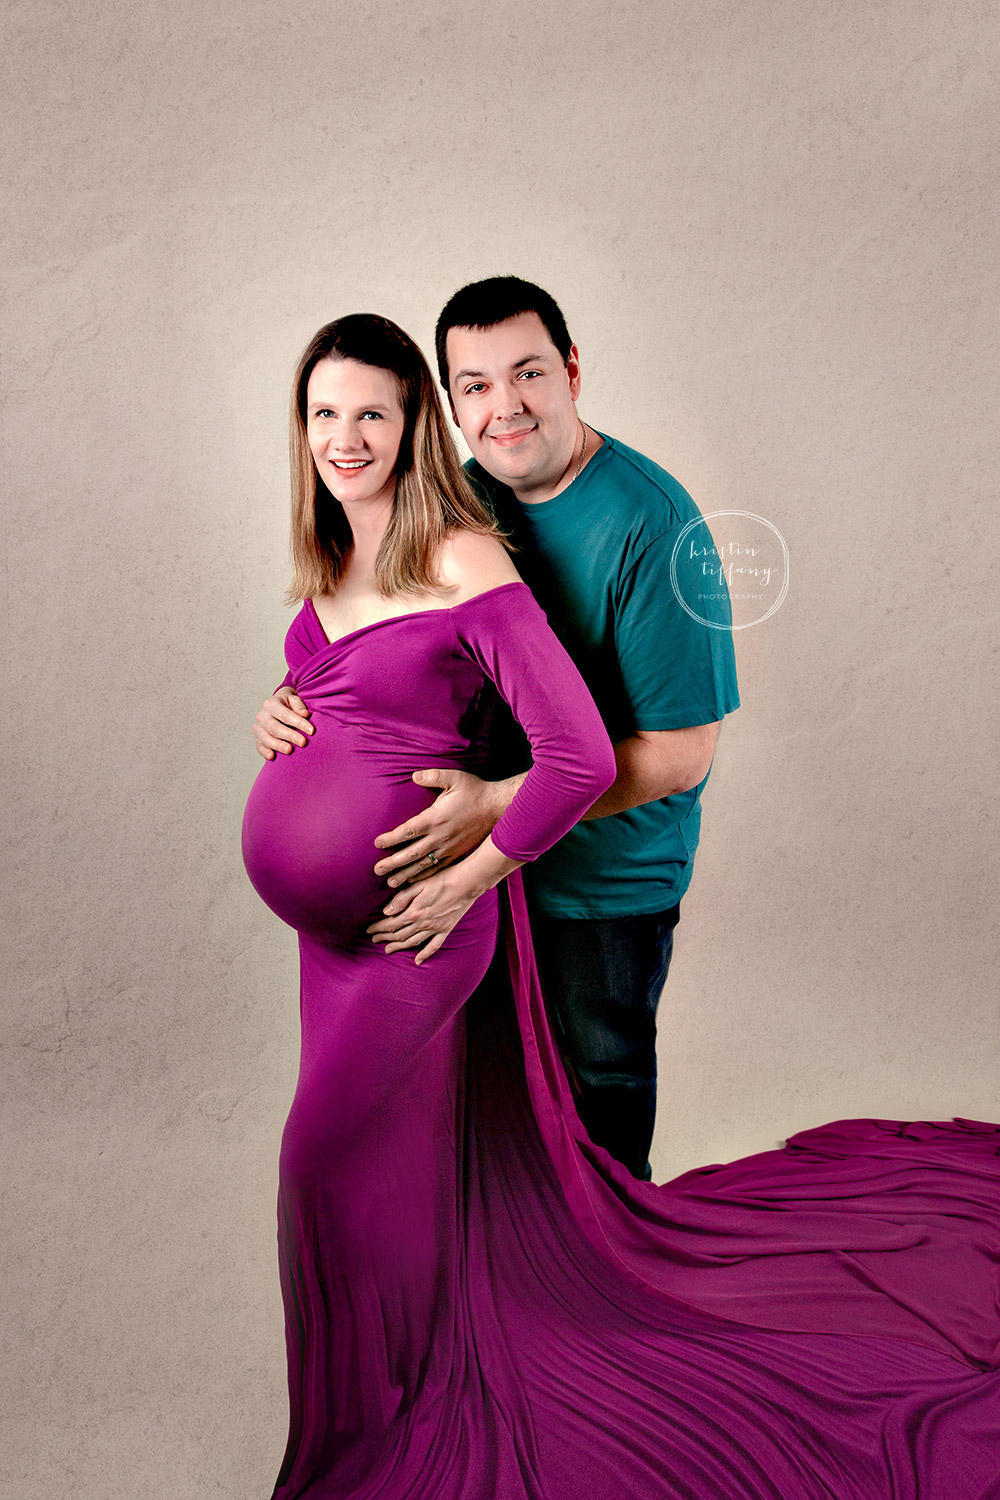 a photo from a maternity photoshoot with Kristin Tiffany Photography